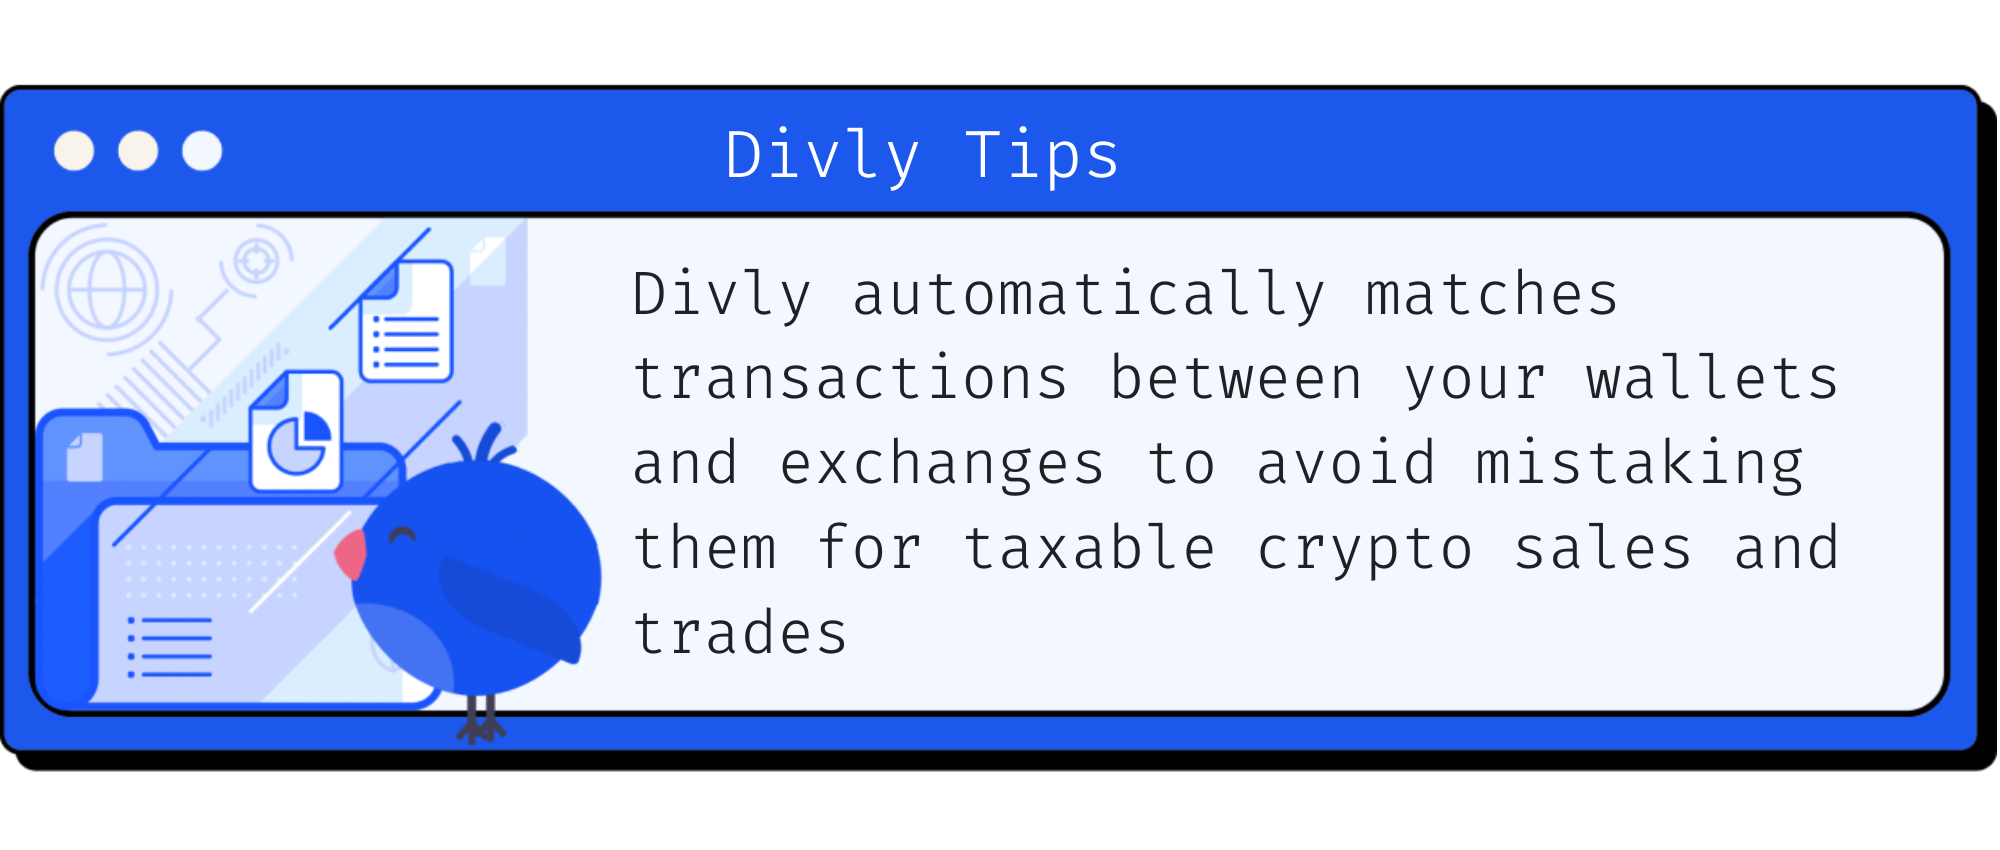 Divly automatically matches transaction between your wallets & exchanges to avoid mistaking them for taxable crypto sales and trades